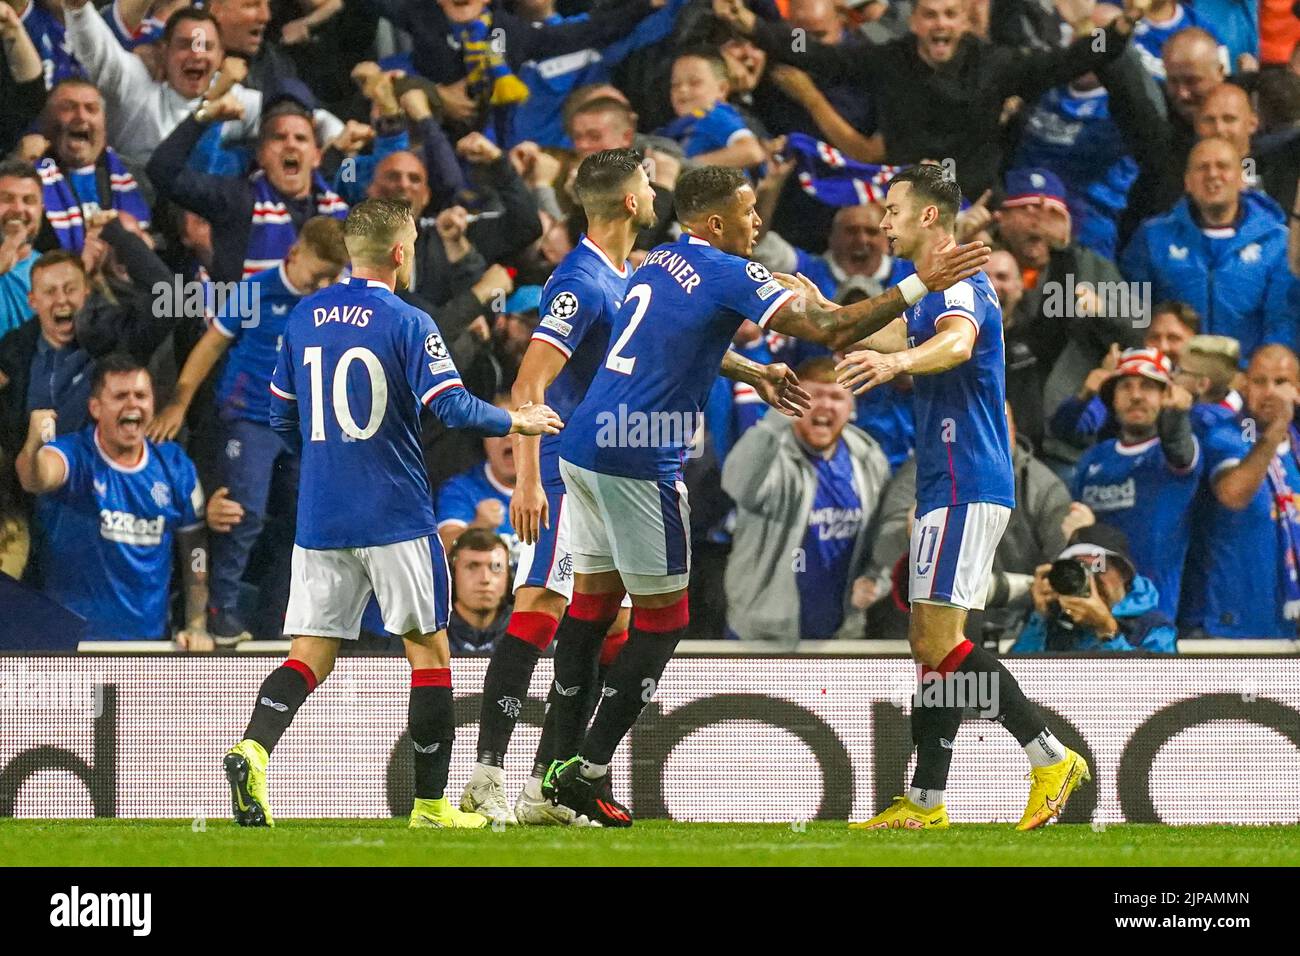 GLASGOW, SCOTLAND - AUGUST 16: Antonio Colak of Rangers celebrating scoring his sides first goal alongside his teammates during the UEFA Champions League Qualification - First Leg match between Rangers and PSV Eindhoven at Ibrox Stadium on August 16, 2022 in Glasgow, Scotland (Photo by Joris Verwijst/Orange Pictures) Stock Photo